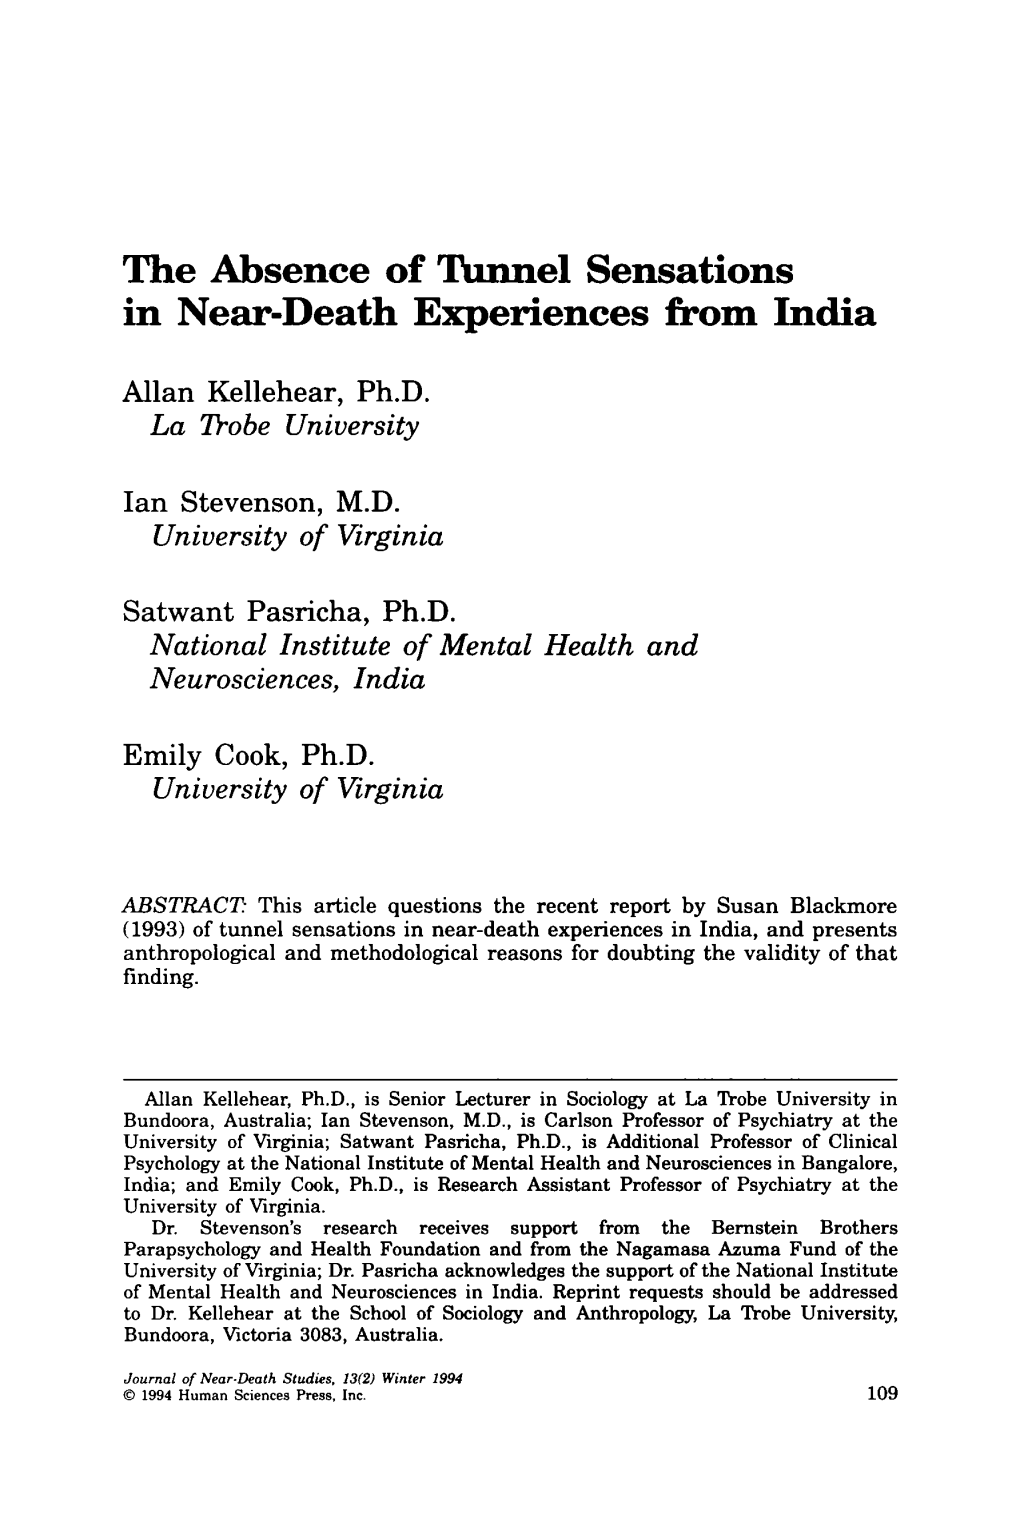 The Absence of Tunnel Sensations in Near-Death Experiences from India